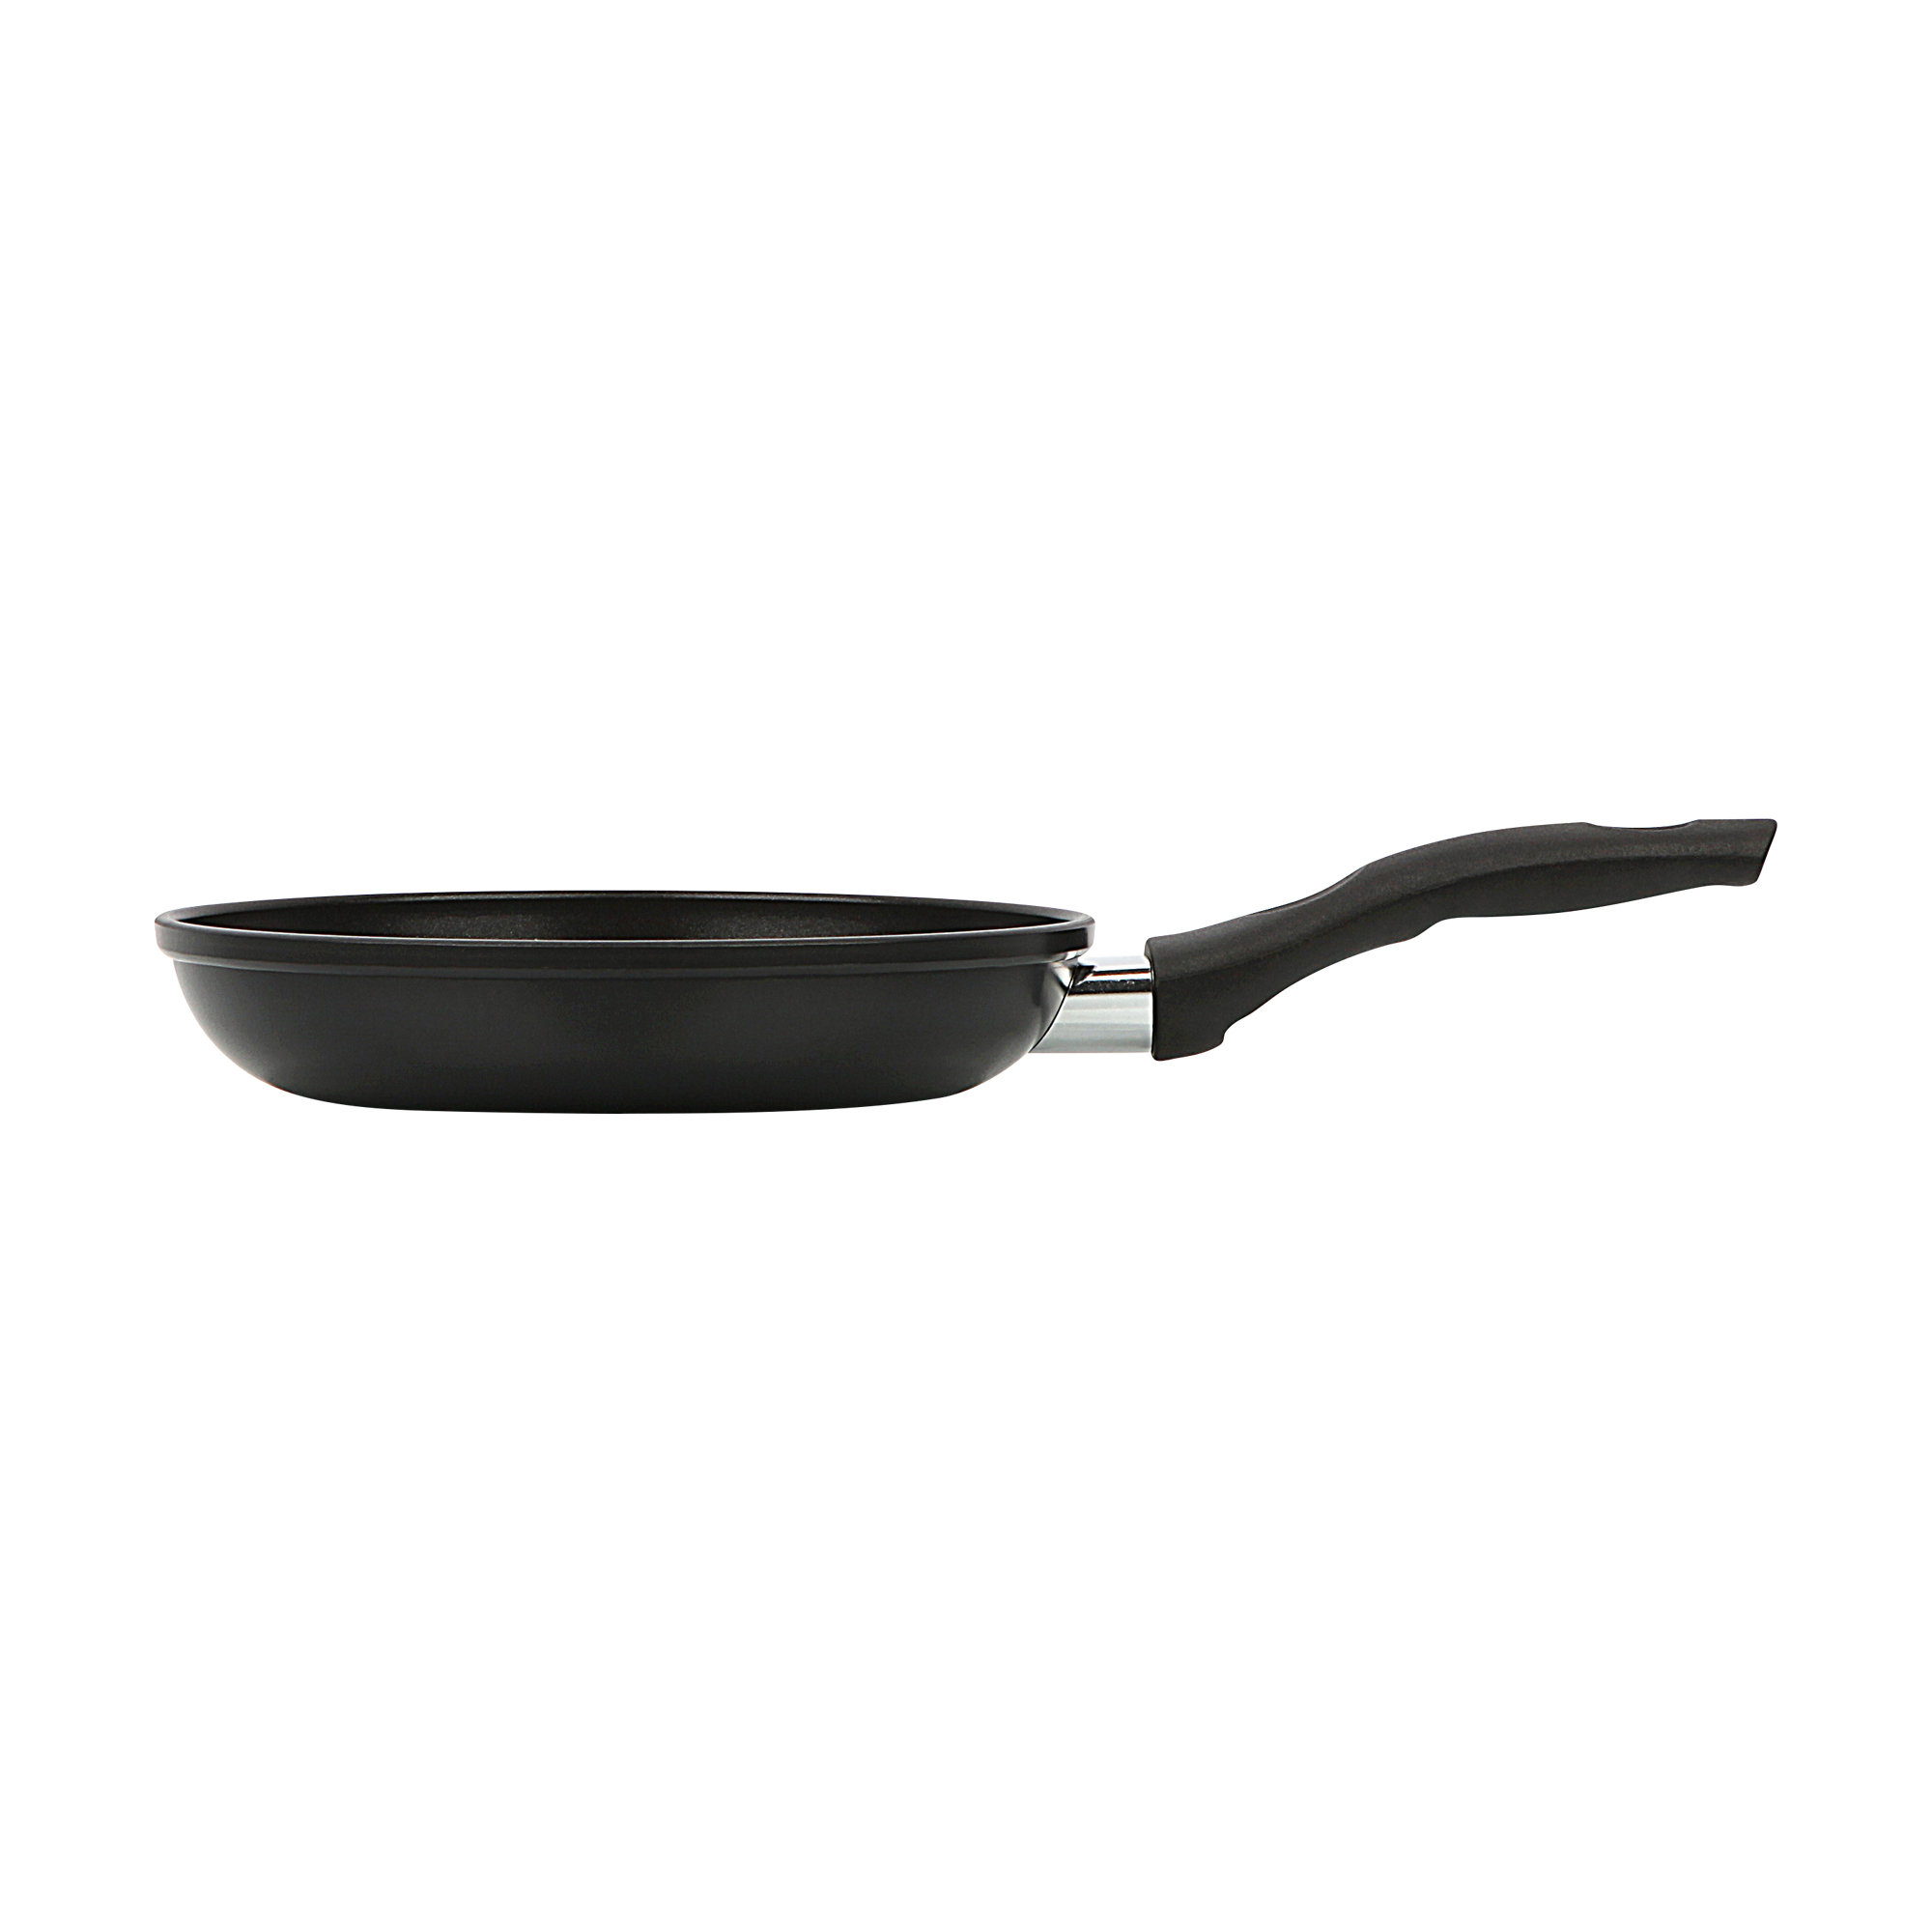 Mainstays Aluminum Alloy 8 inch Non-Stick Skillet 20cm Frypan - image 3 of 6